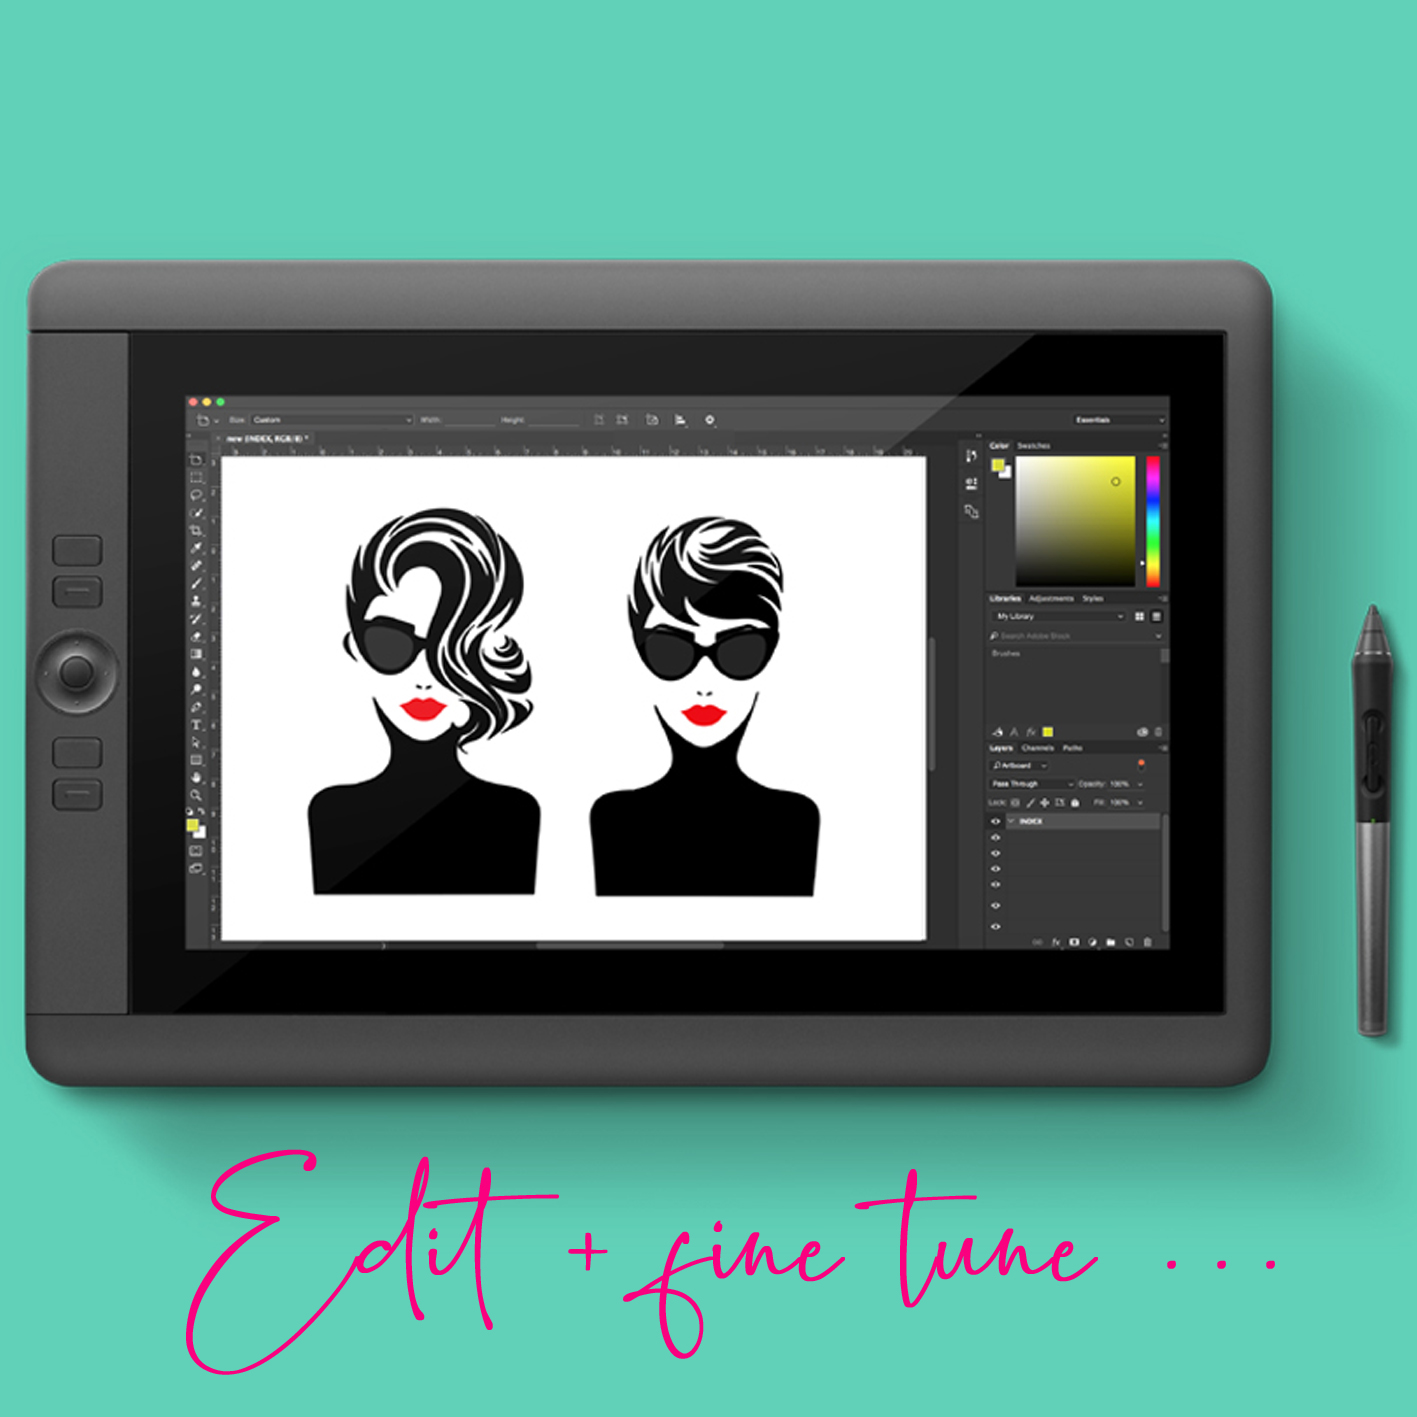 edit-+-fine-tune-coloured-women-graphic-on-tablet